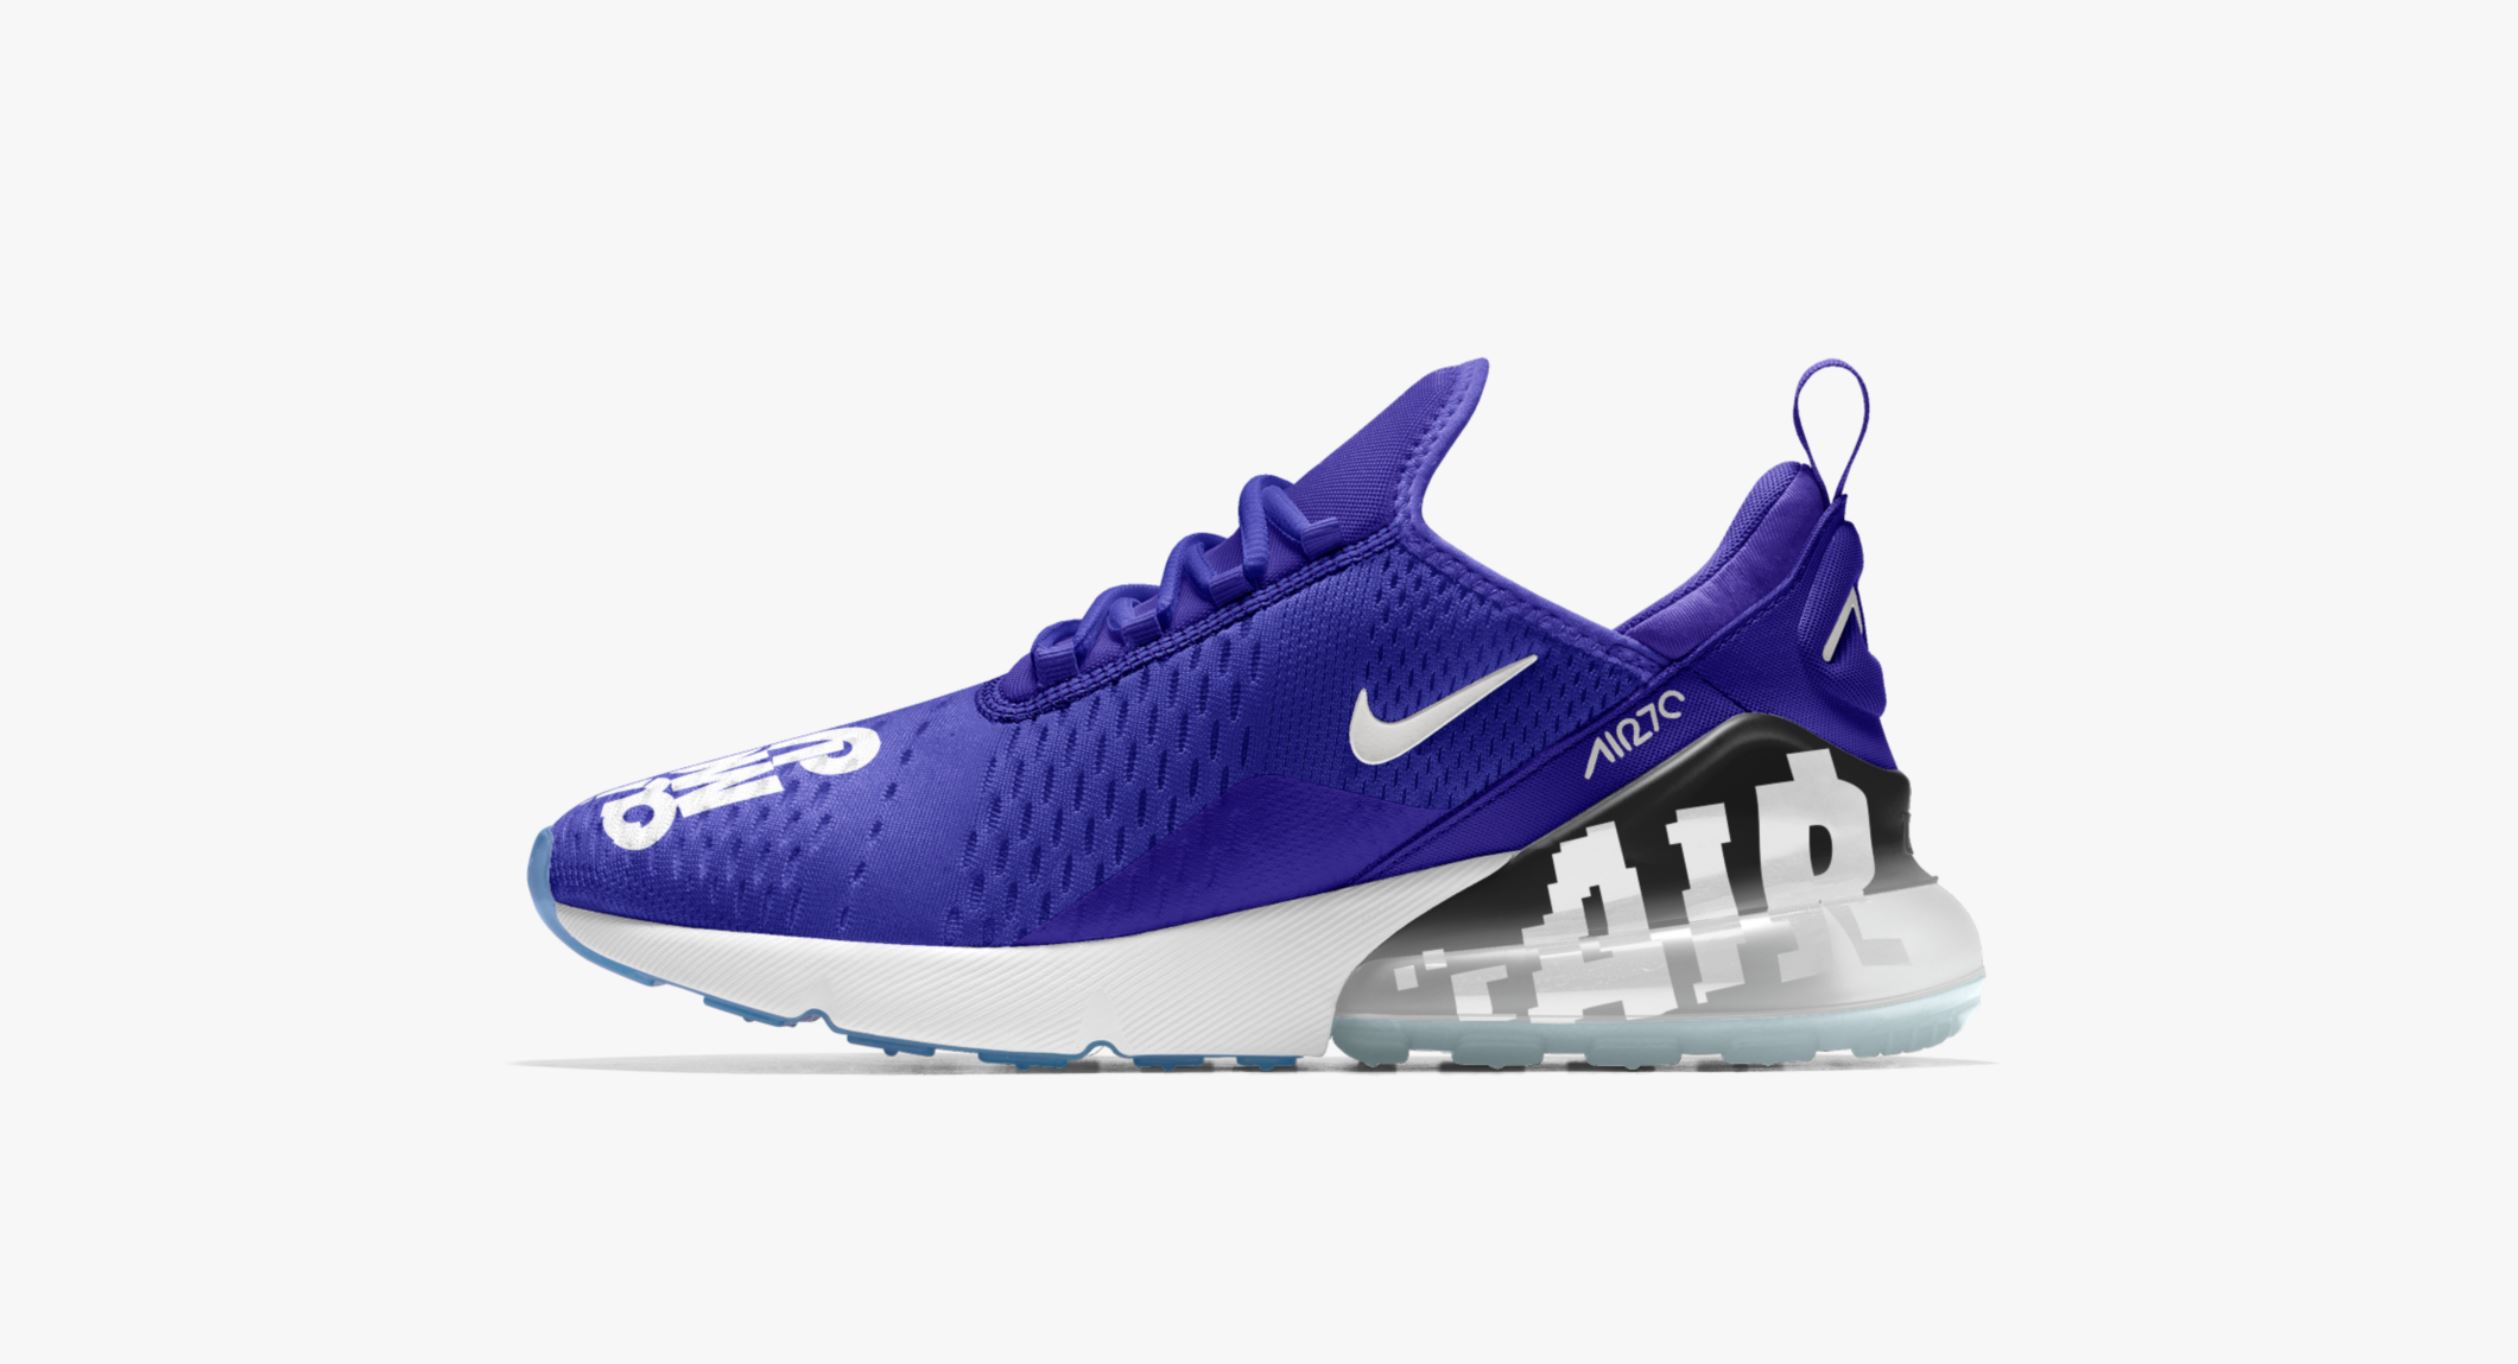 The Nike Air Max 270 Has Hit NikeiD for 